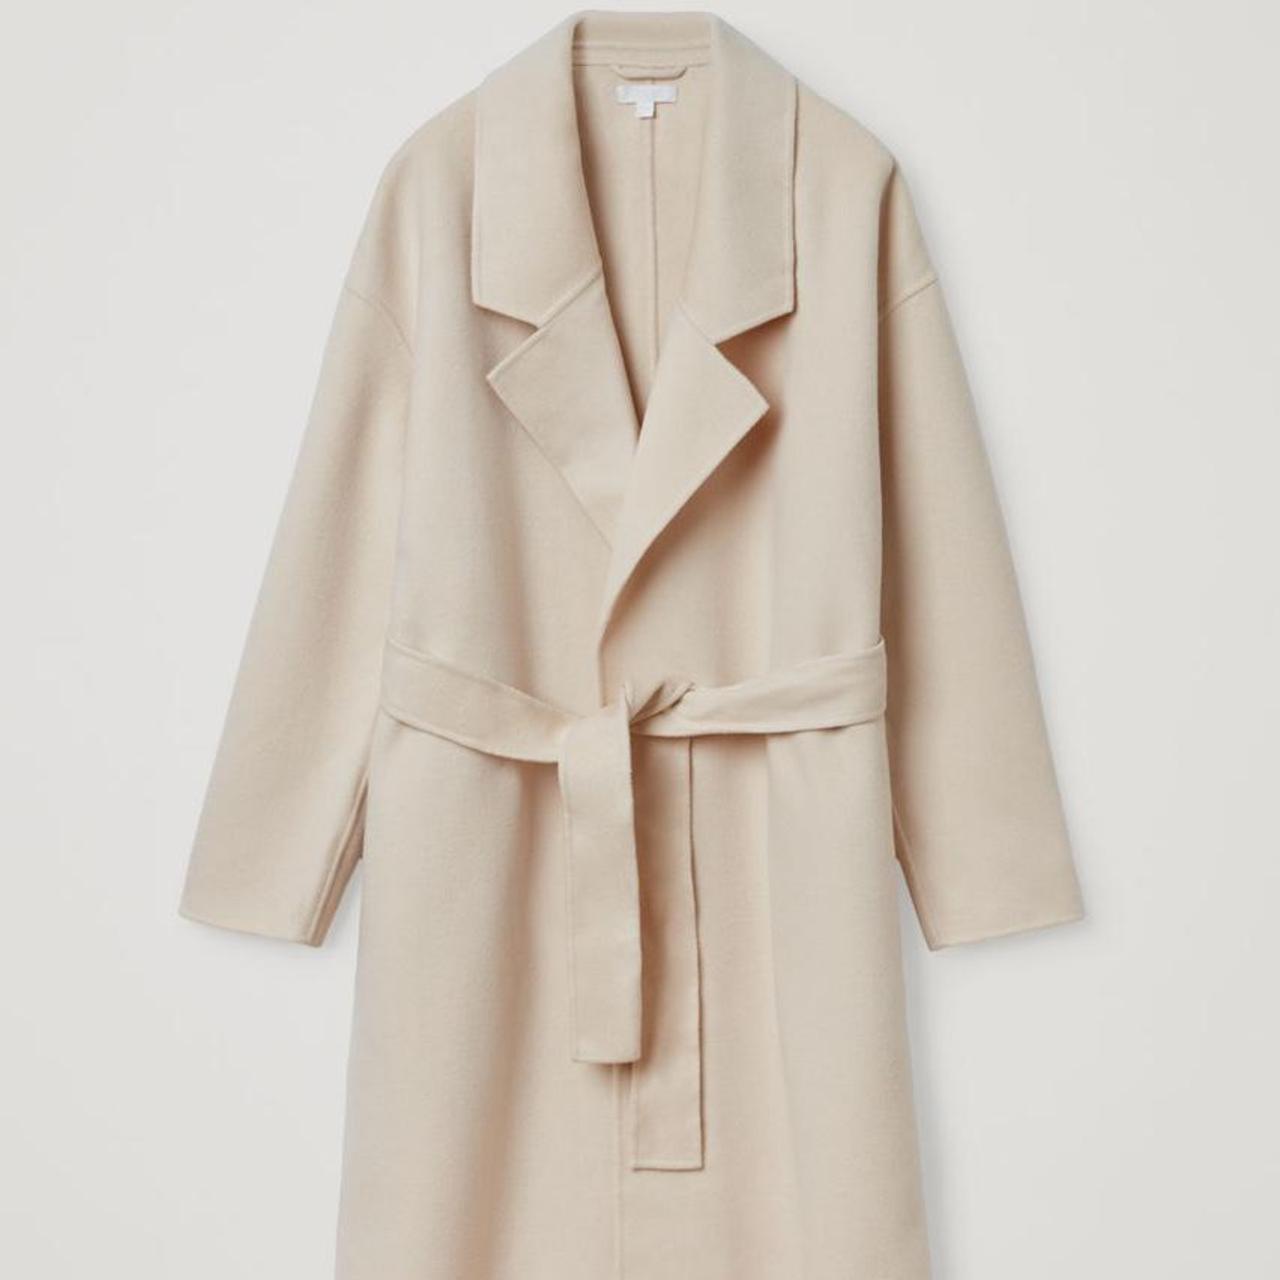 COS WOOL MIX RELAXED BELTED COAT, If you’re located